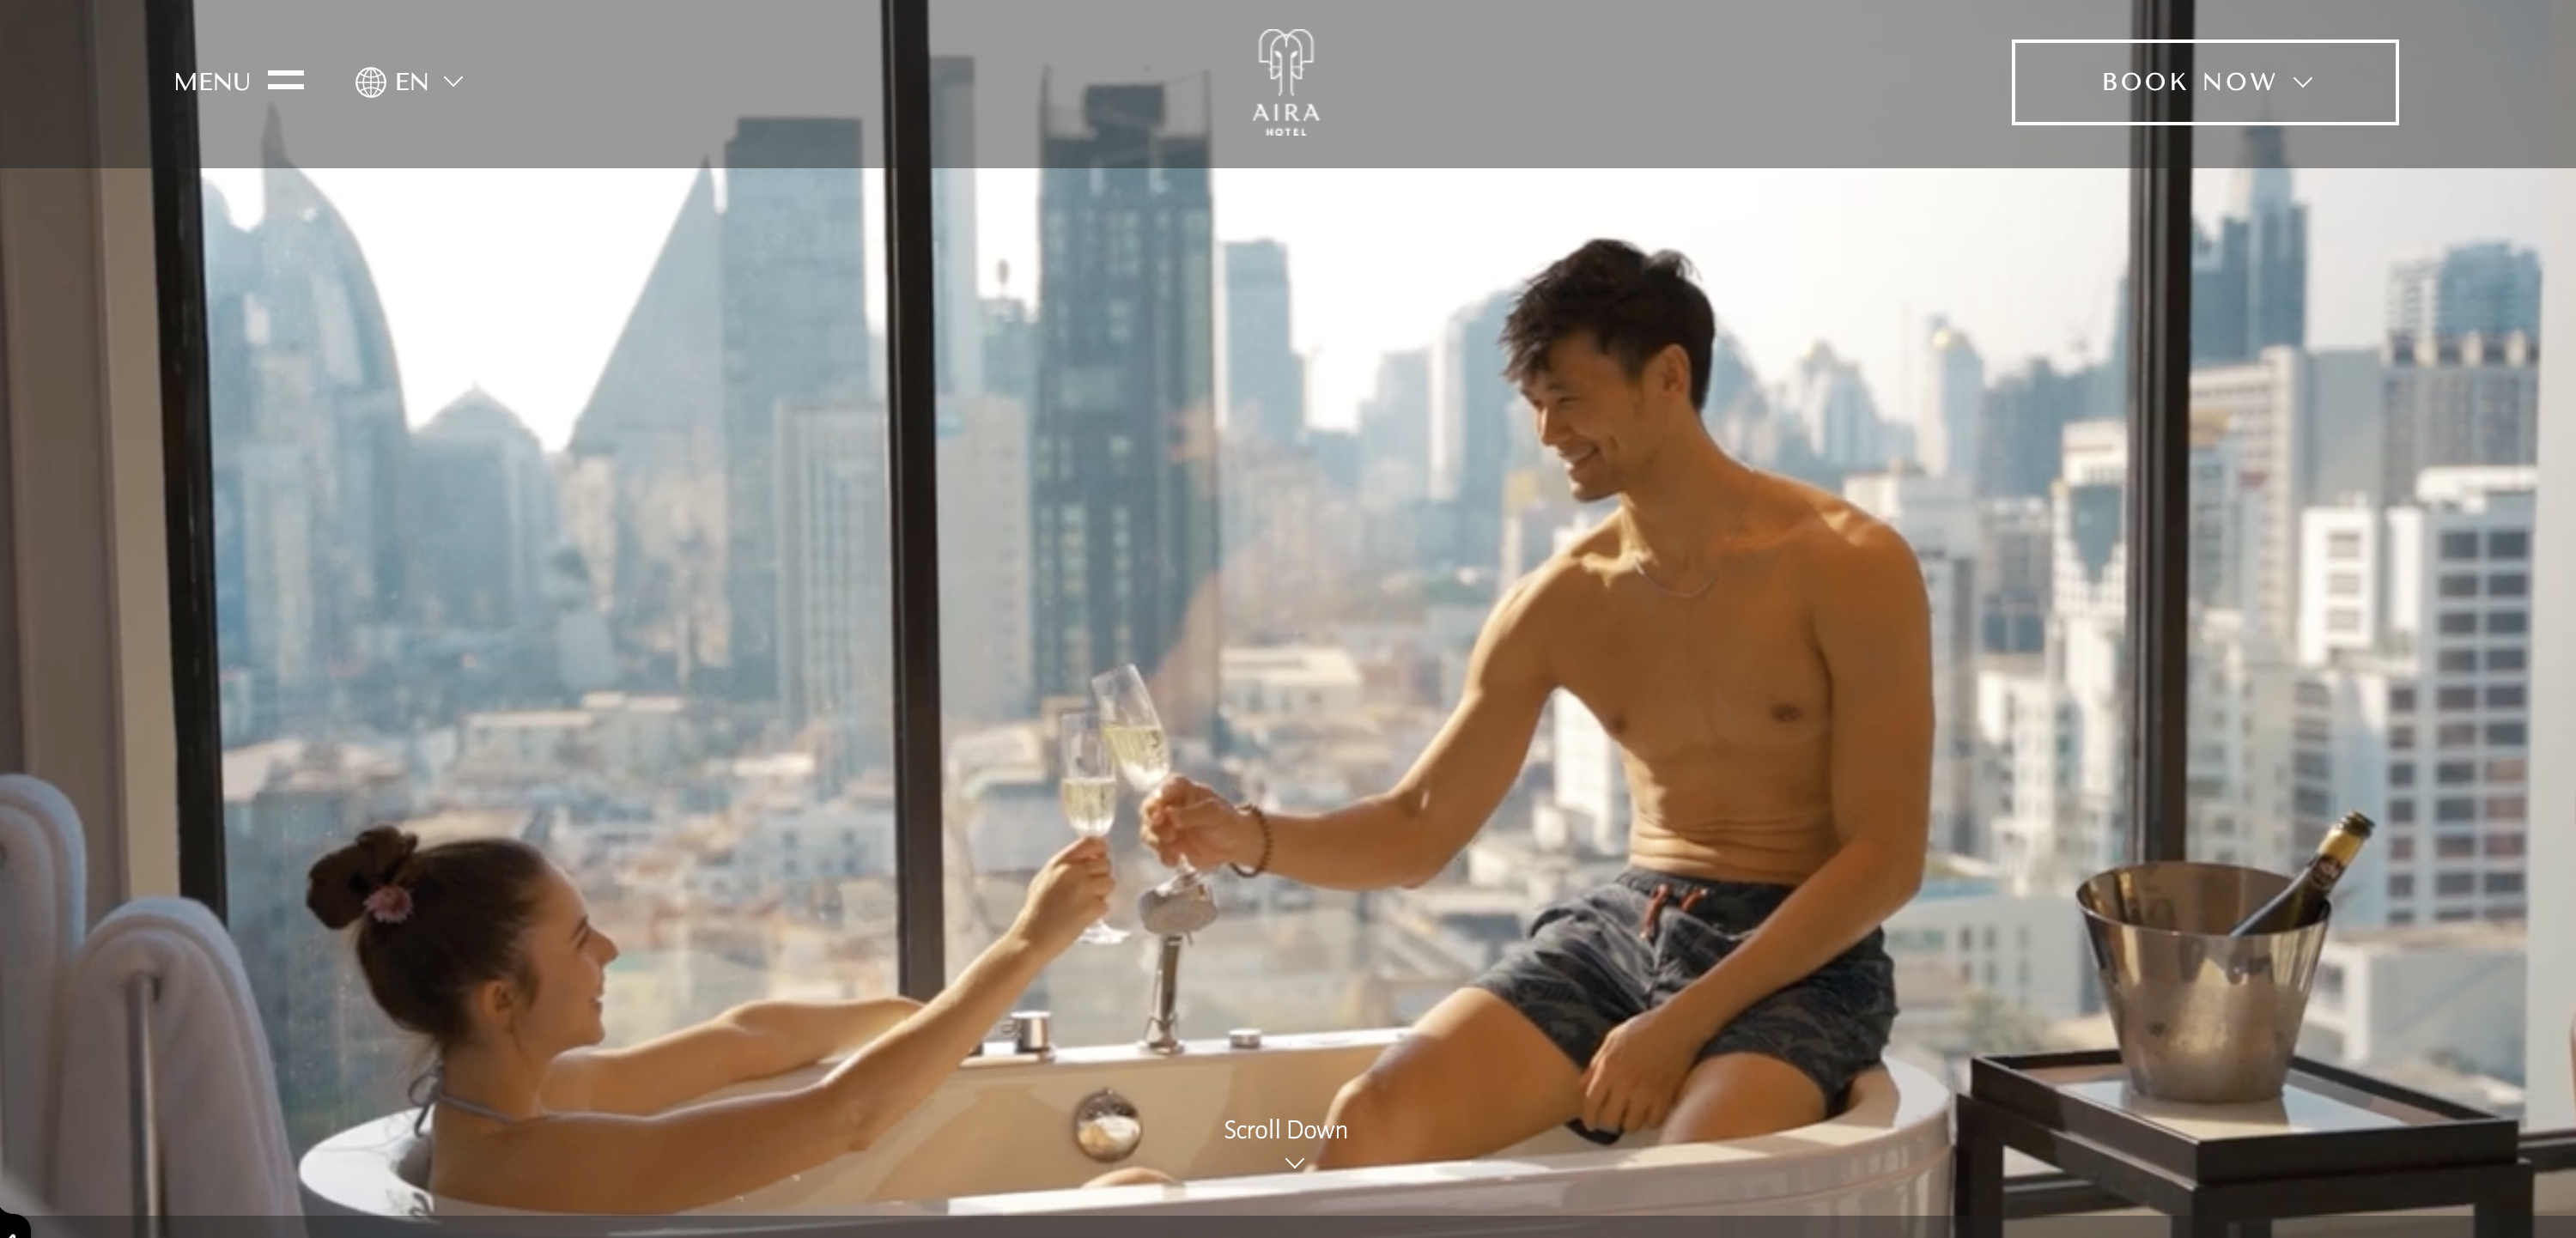 A man and women enjoying champagne in a bathtub with a city view of Bangkok in the background